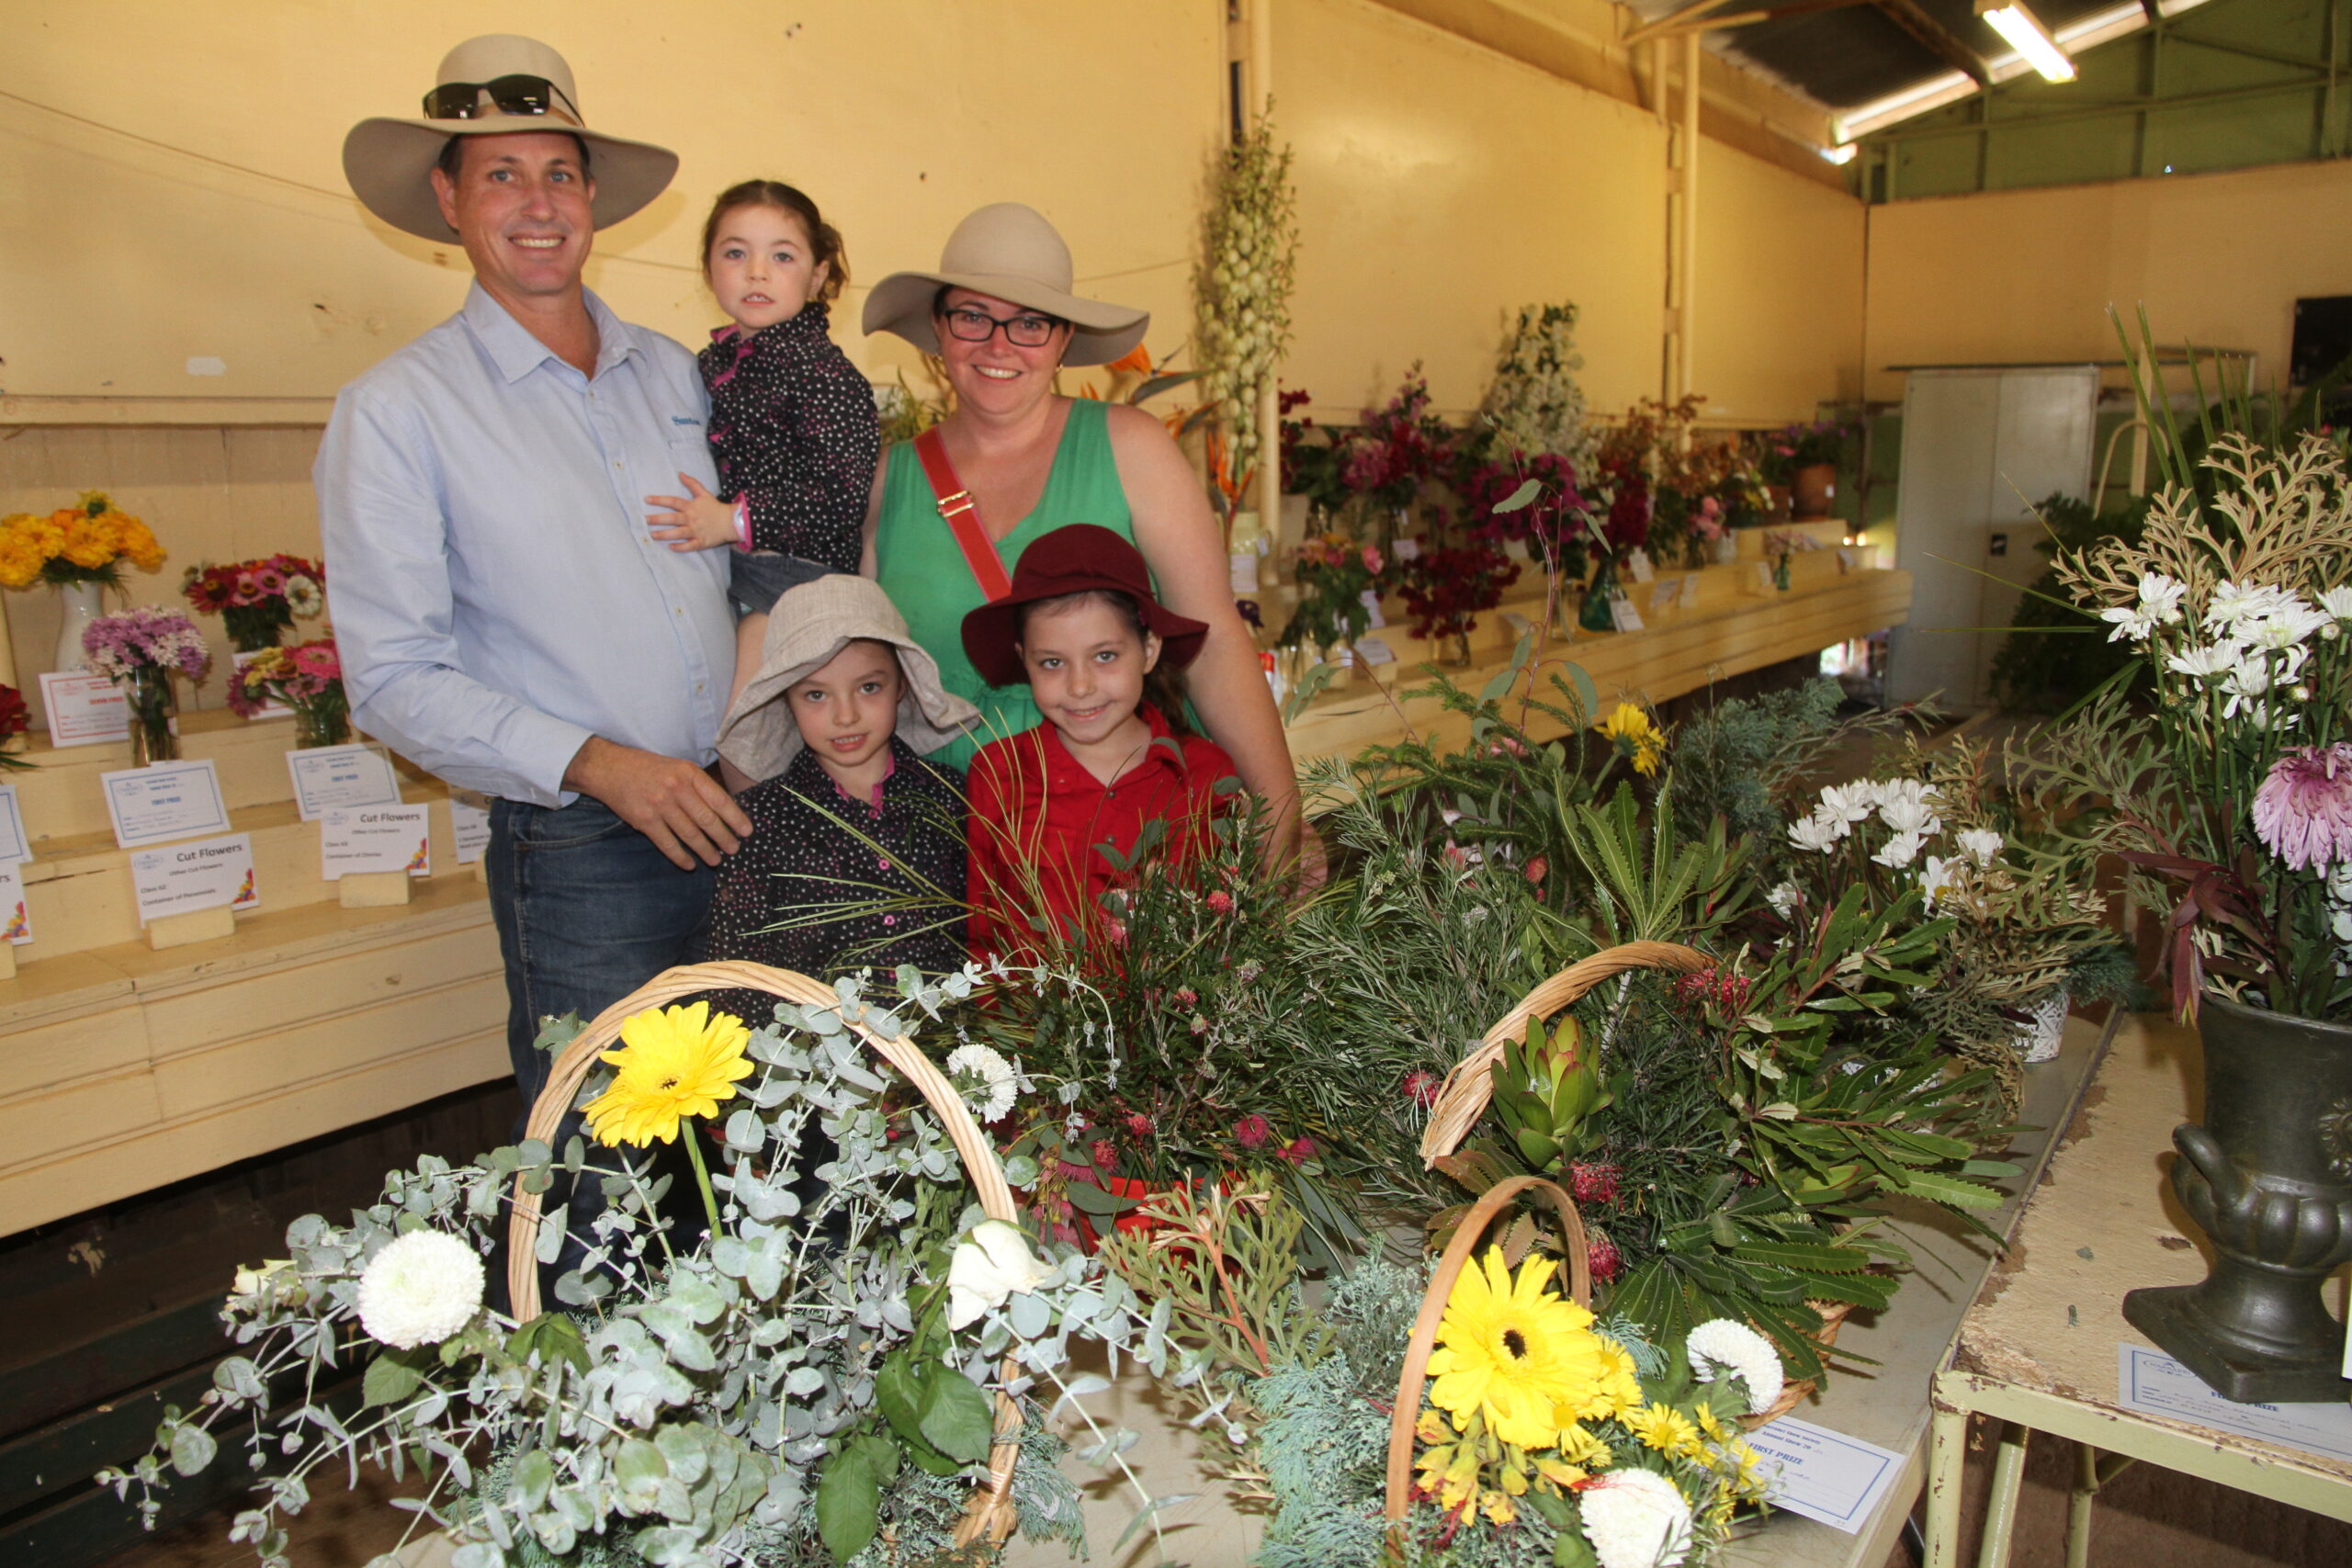 The last flower show has been held in the historic George Foxe Horticultural pavilion. Among the visitors admiring the displays on Saturday were the Snars family, Andrew, Madeleene, Christy, and front, Abi and Sophie.